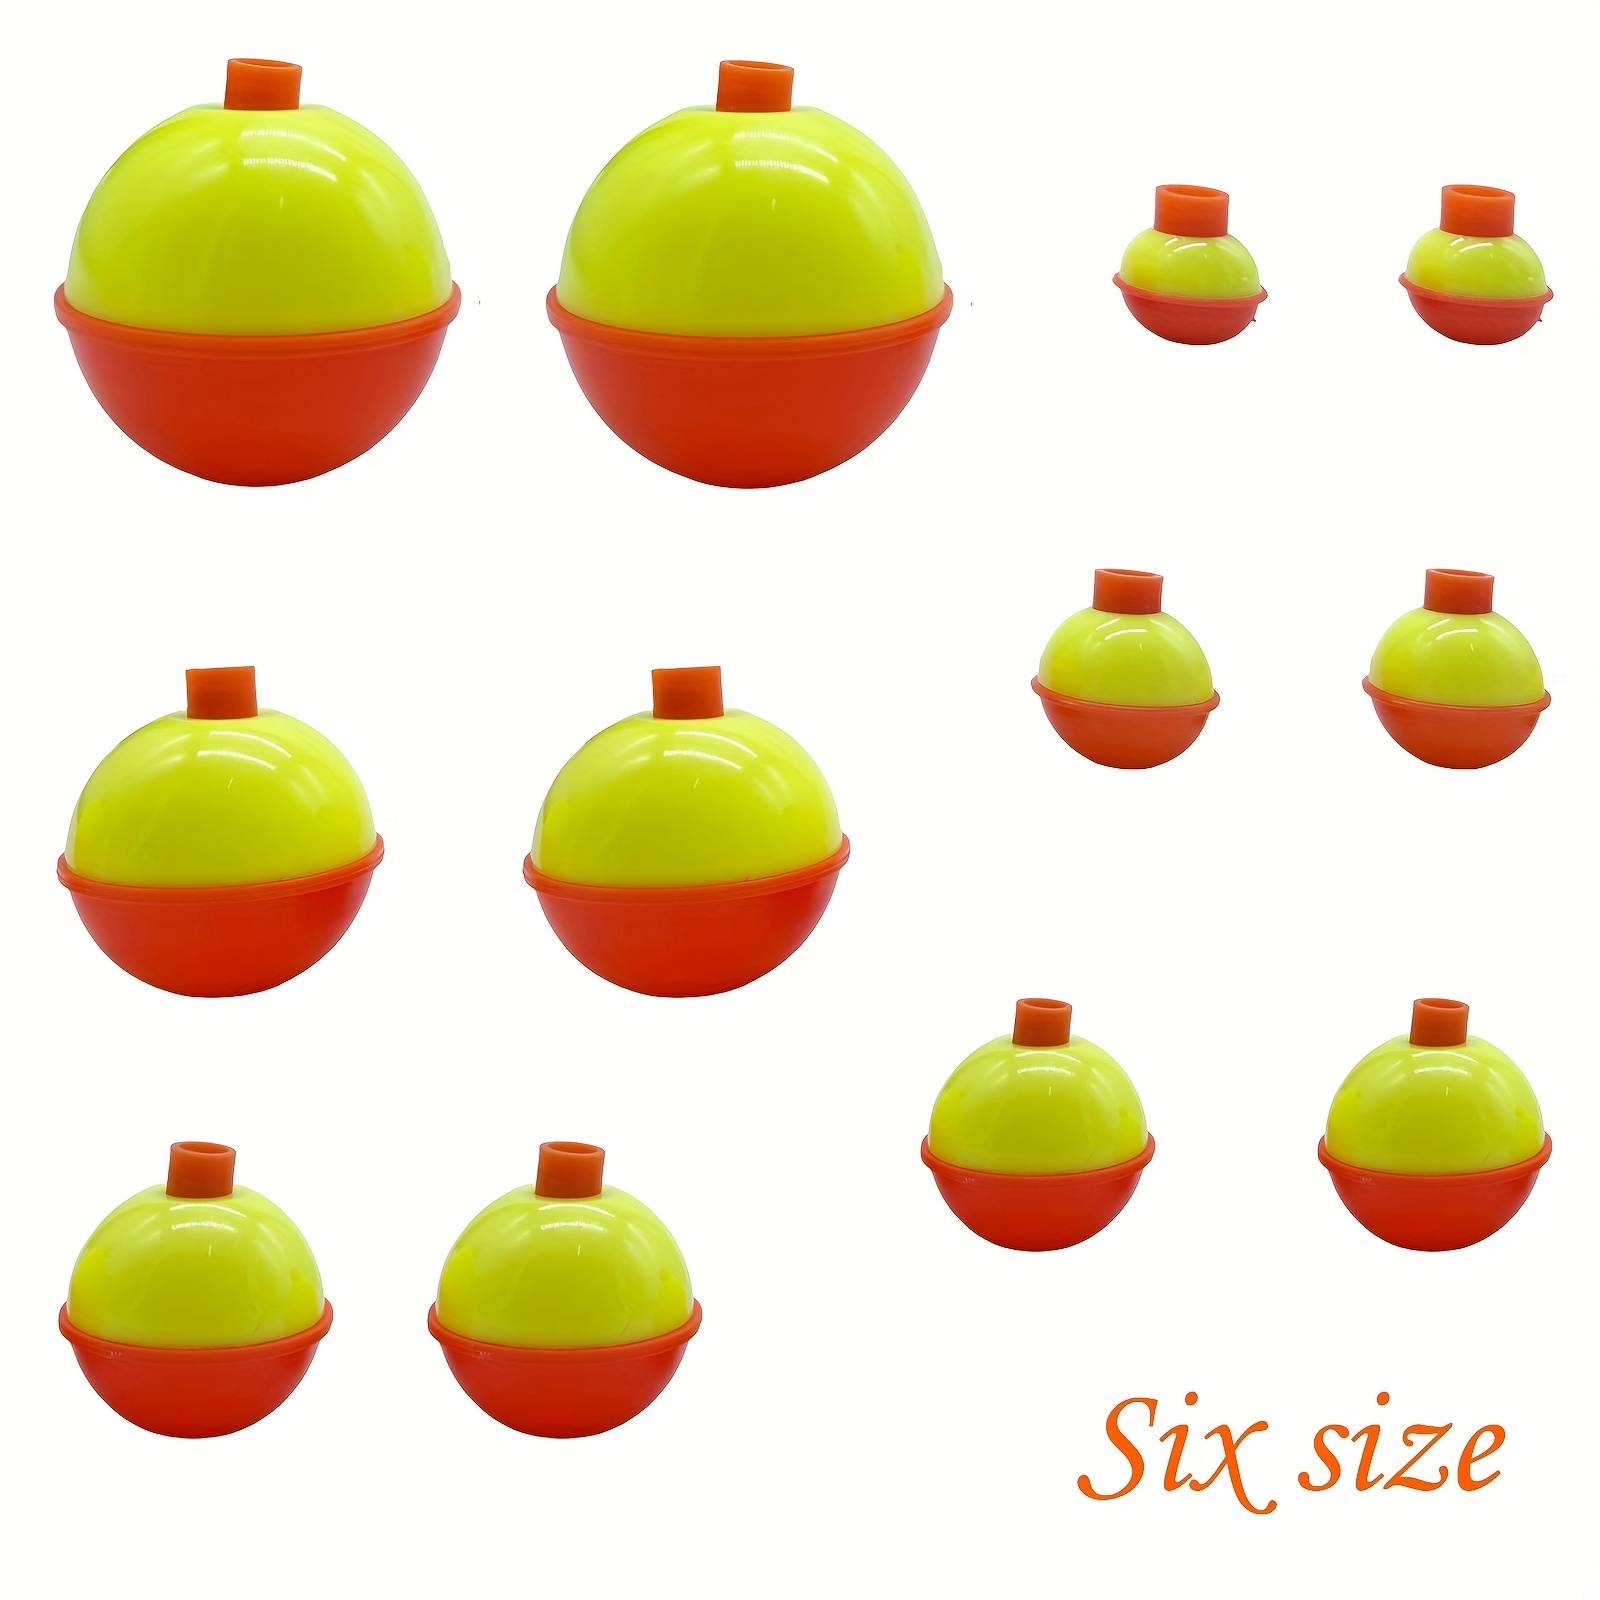 12pcs Fishing Float, Hard ABS Fishing Bobber Bulk, Push Button Round Buoy  Floats For Fishing Tackle Accessories, 2/1.75/1.5/1.25/1/0.75 Inch